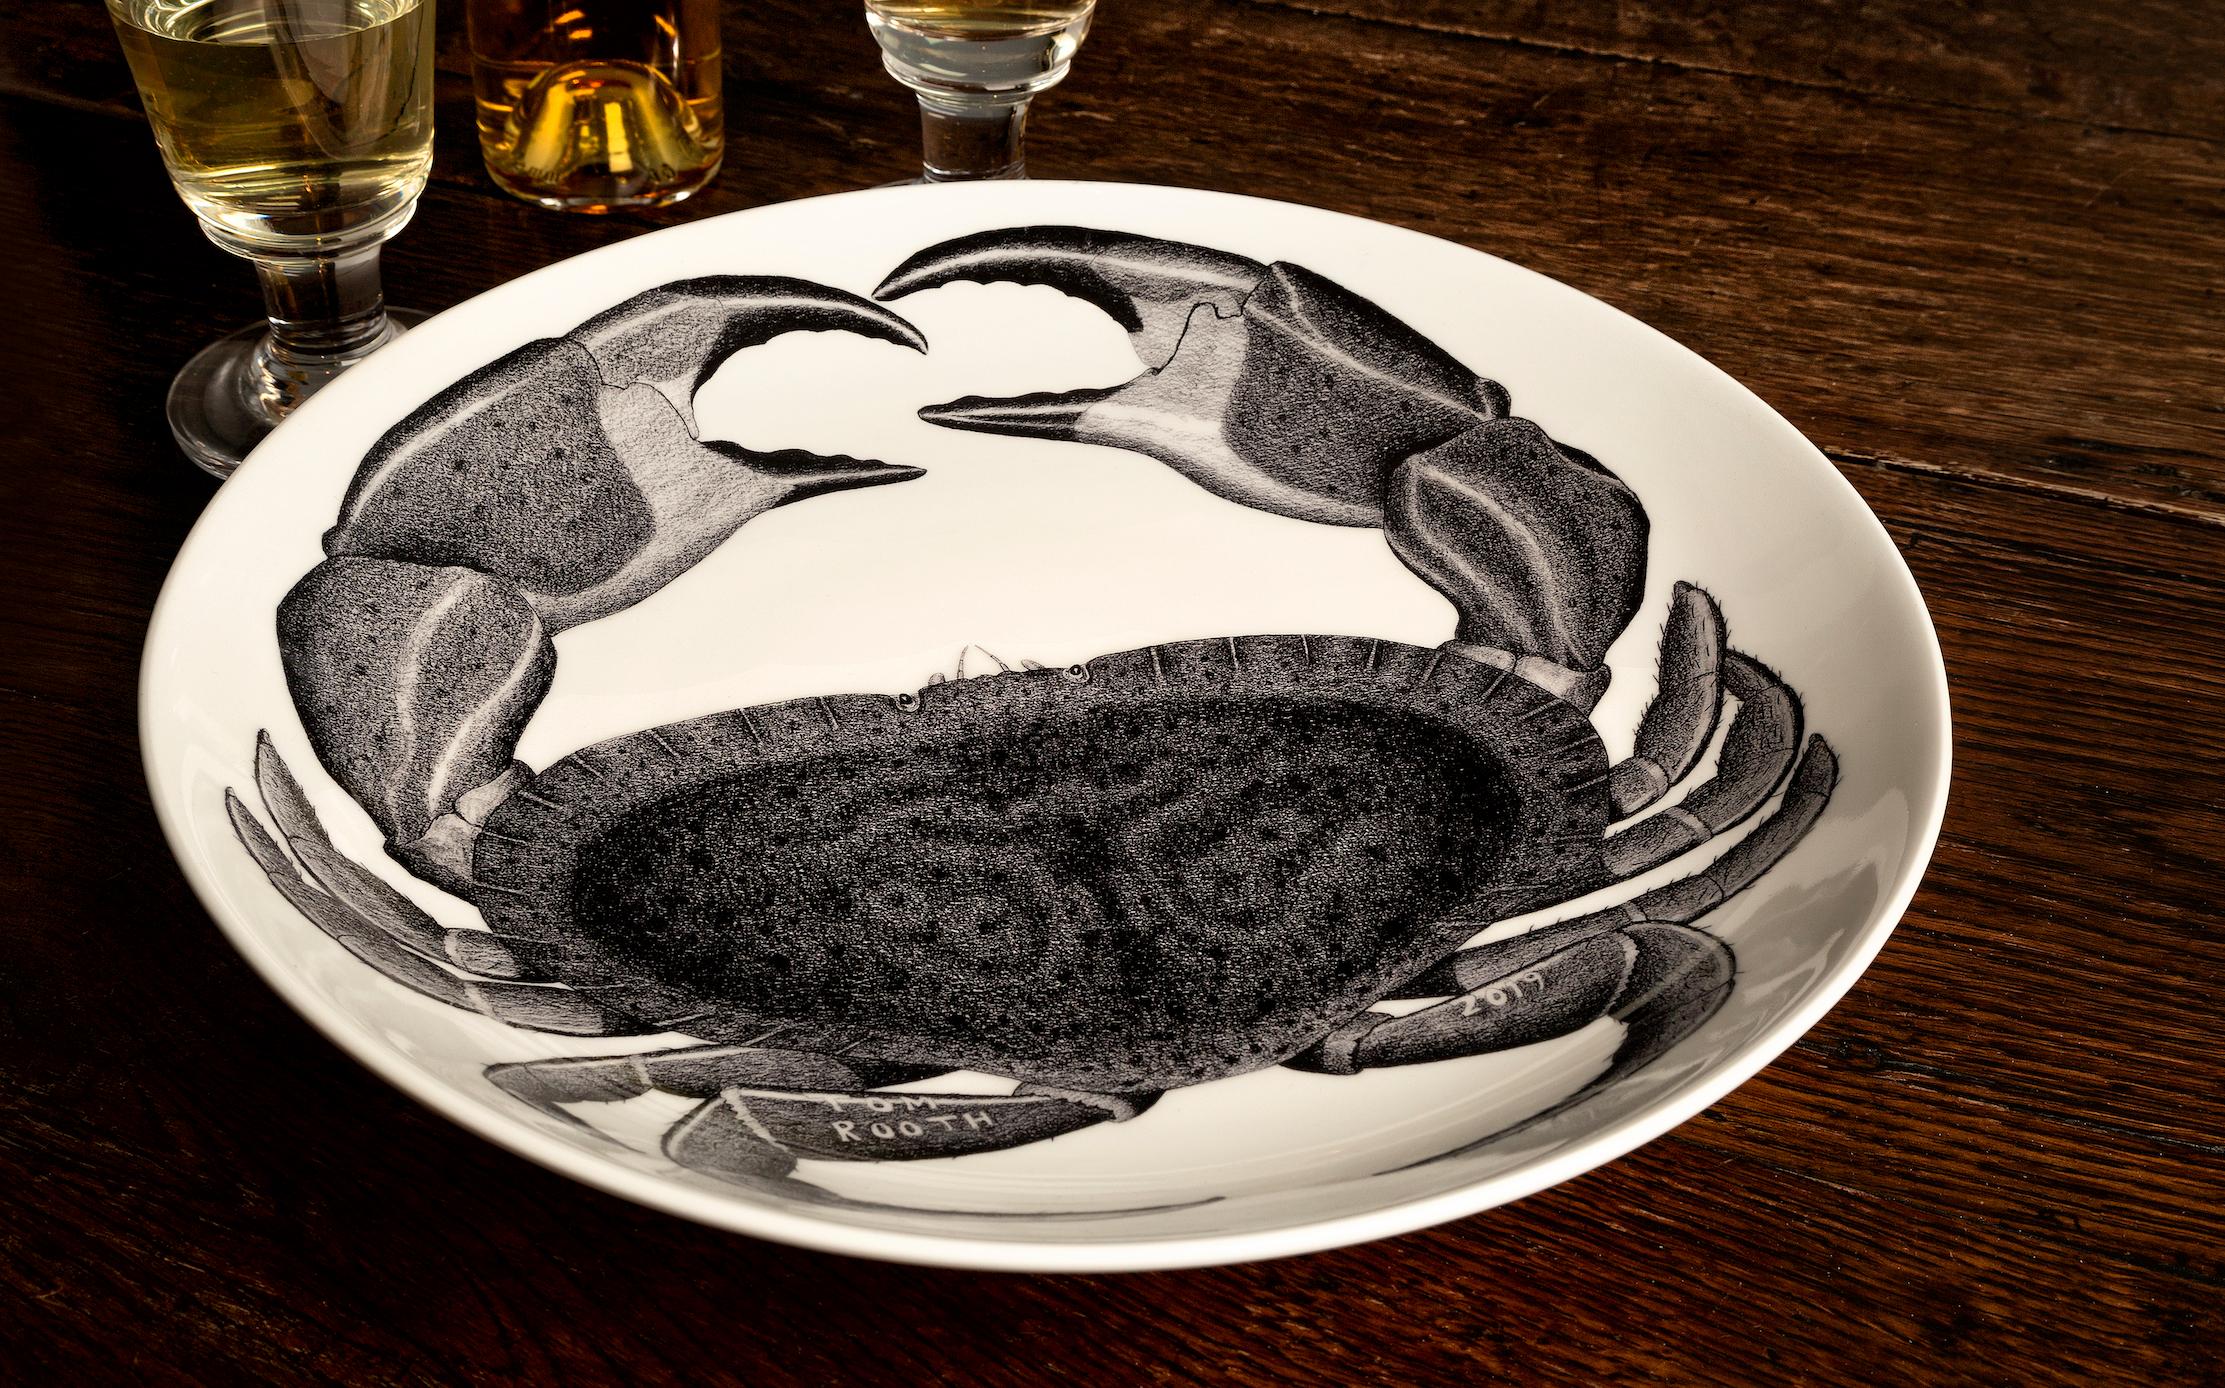 Earthenware Hercules the Crab 'a Life-Sized Crab, Drawn and Released by Tom Rooth' For Sale